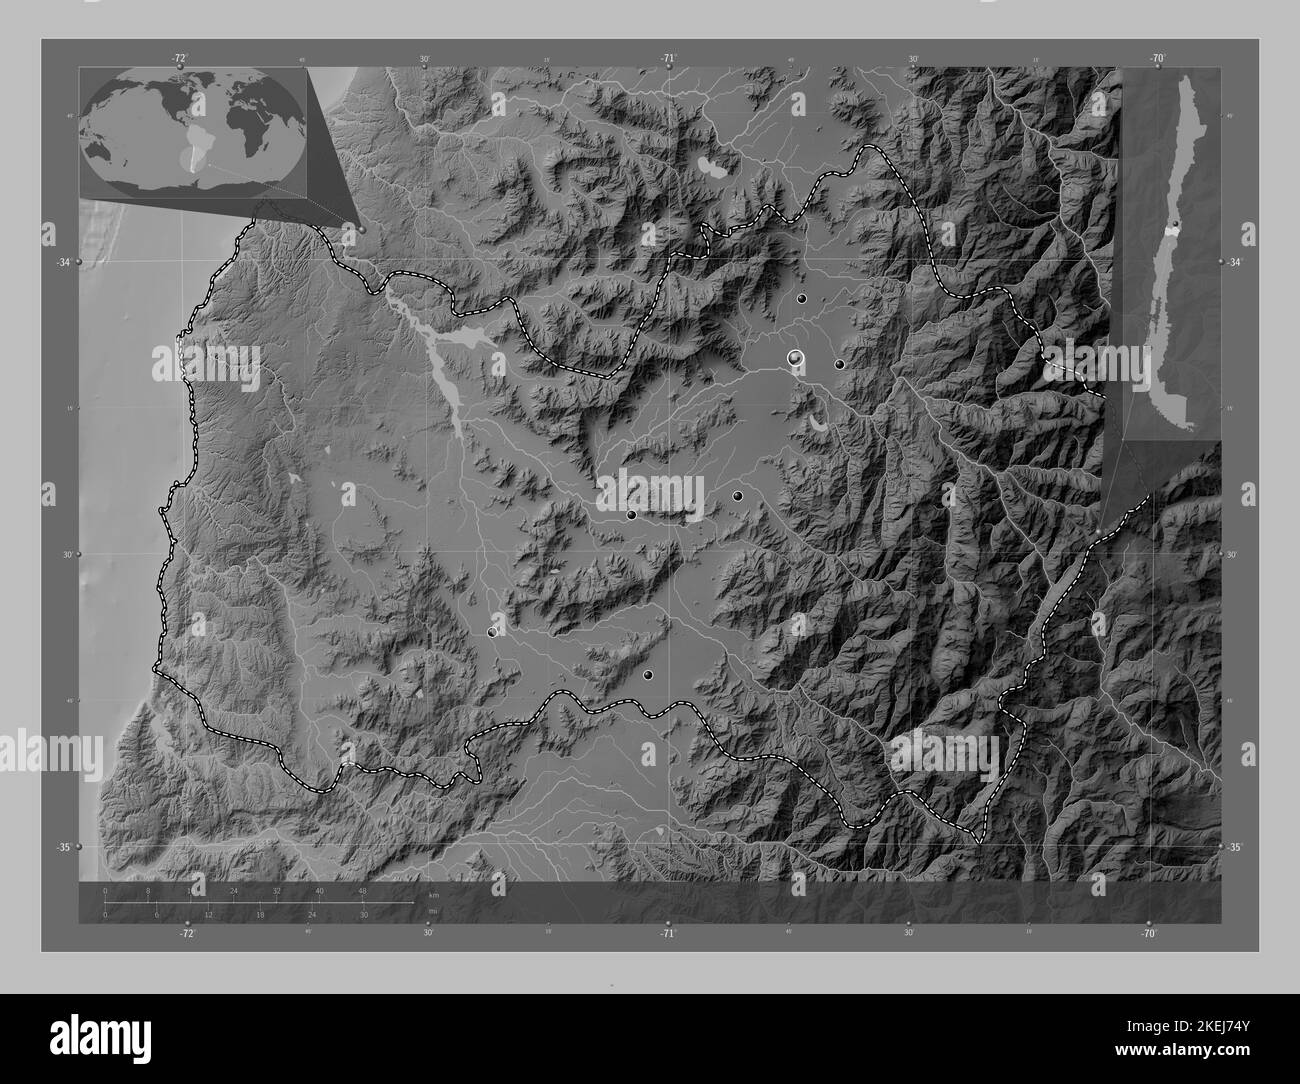 Libertador General Bernardo O'Higgins, region of Chile. Grayscale elevation map with lakes and rivers. Locations of major cities of the region. Corner Stock Photo